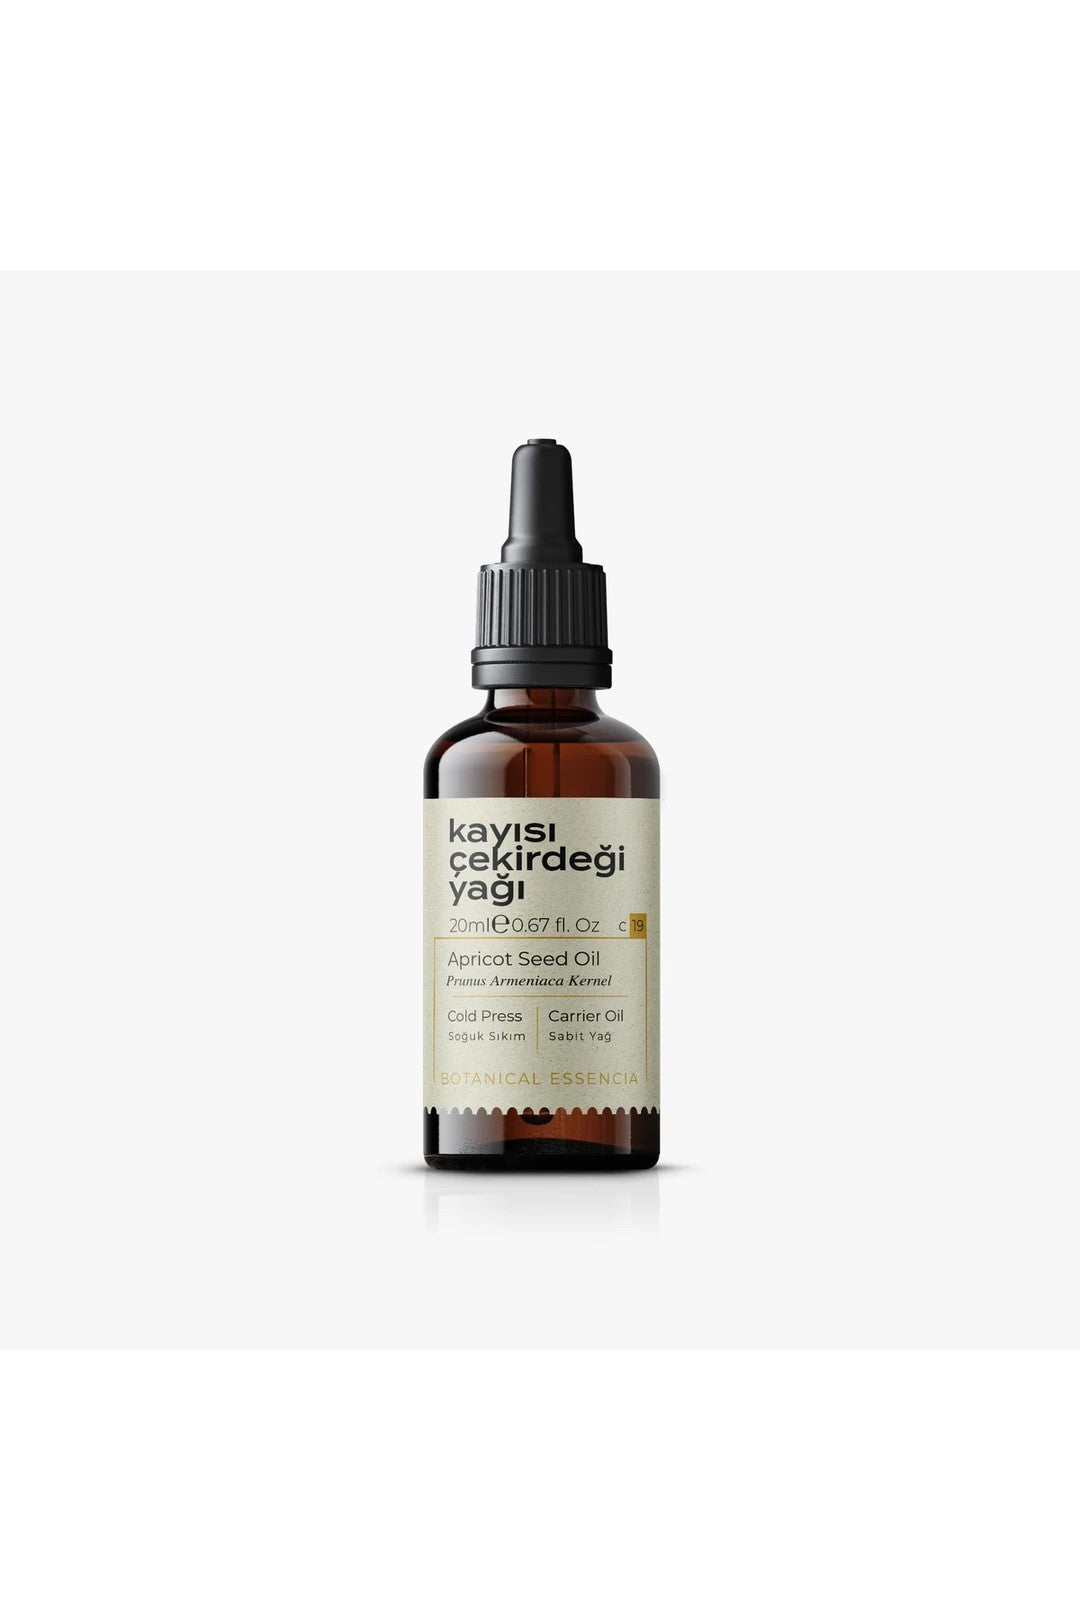 GREENLABEL APRICOT SEED OIL 20ML 1